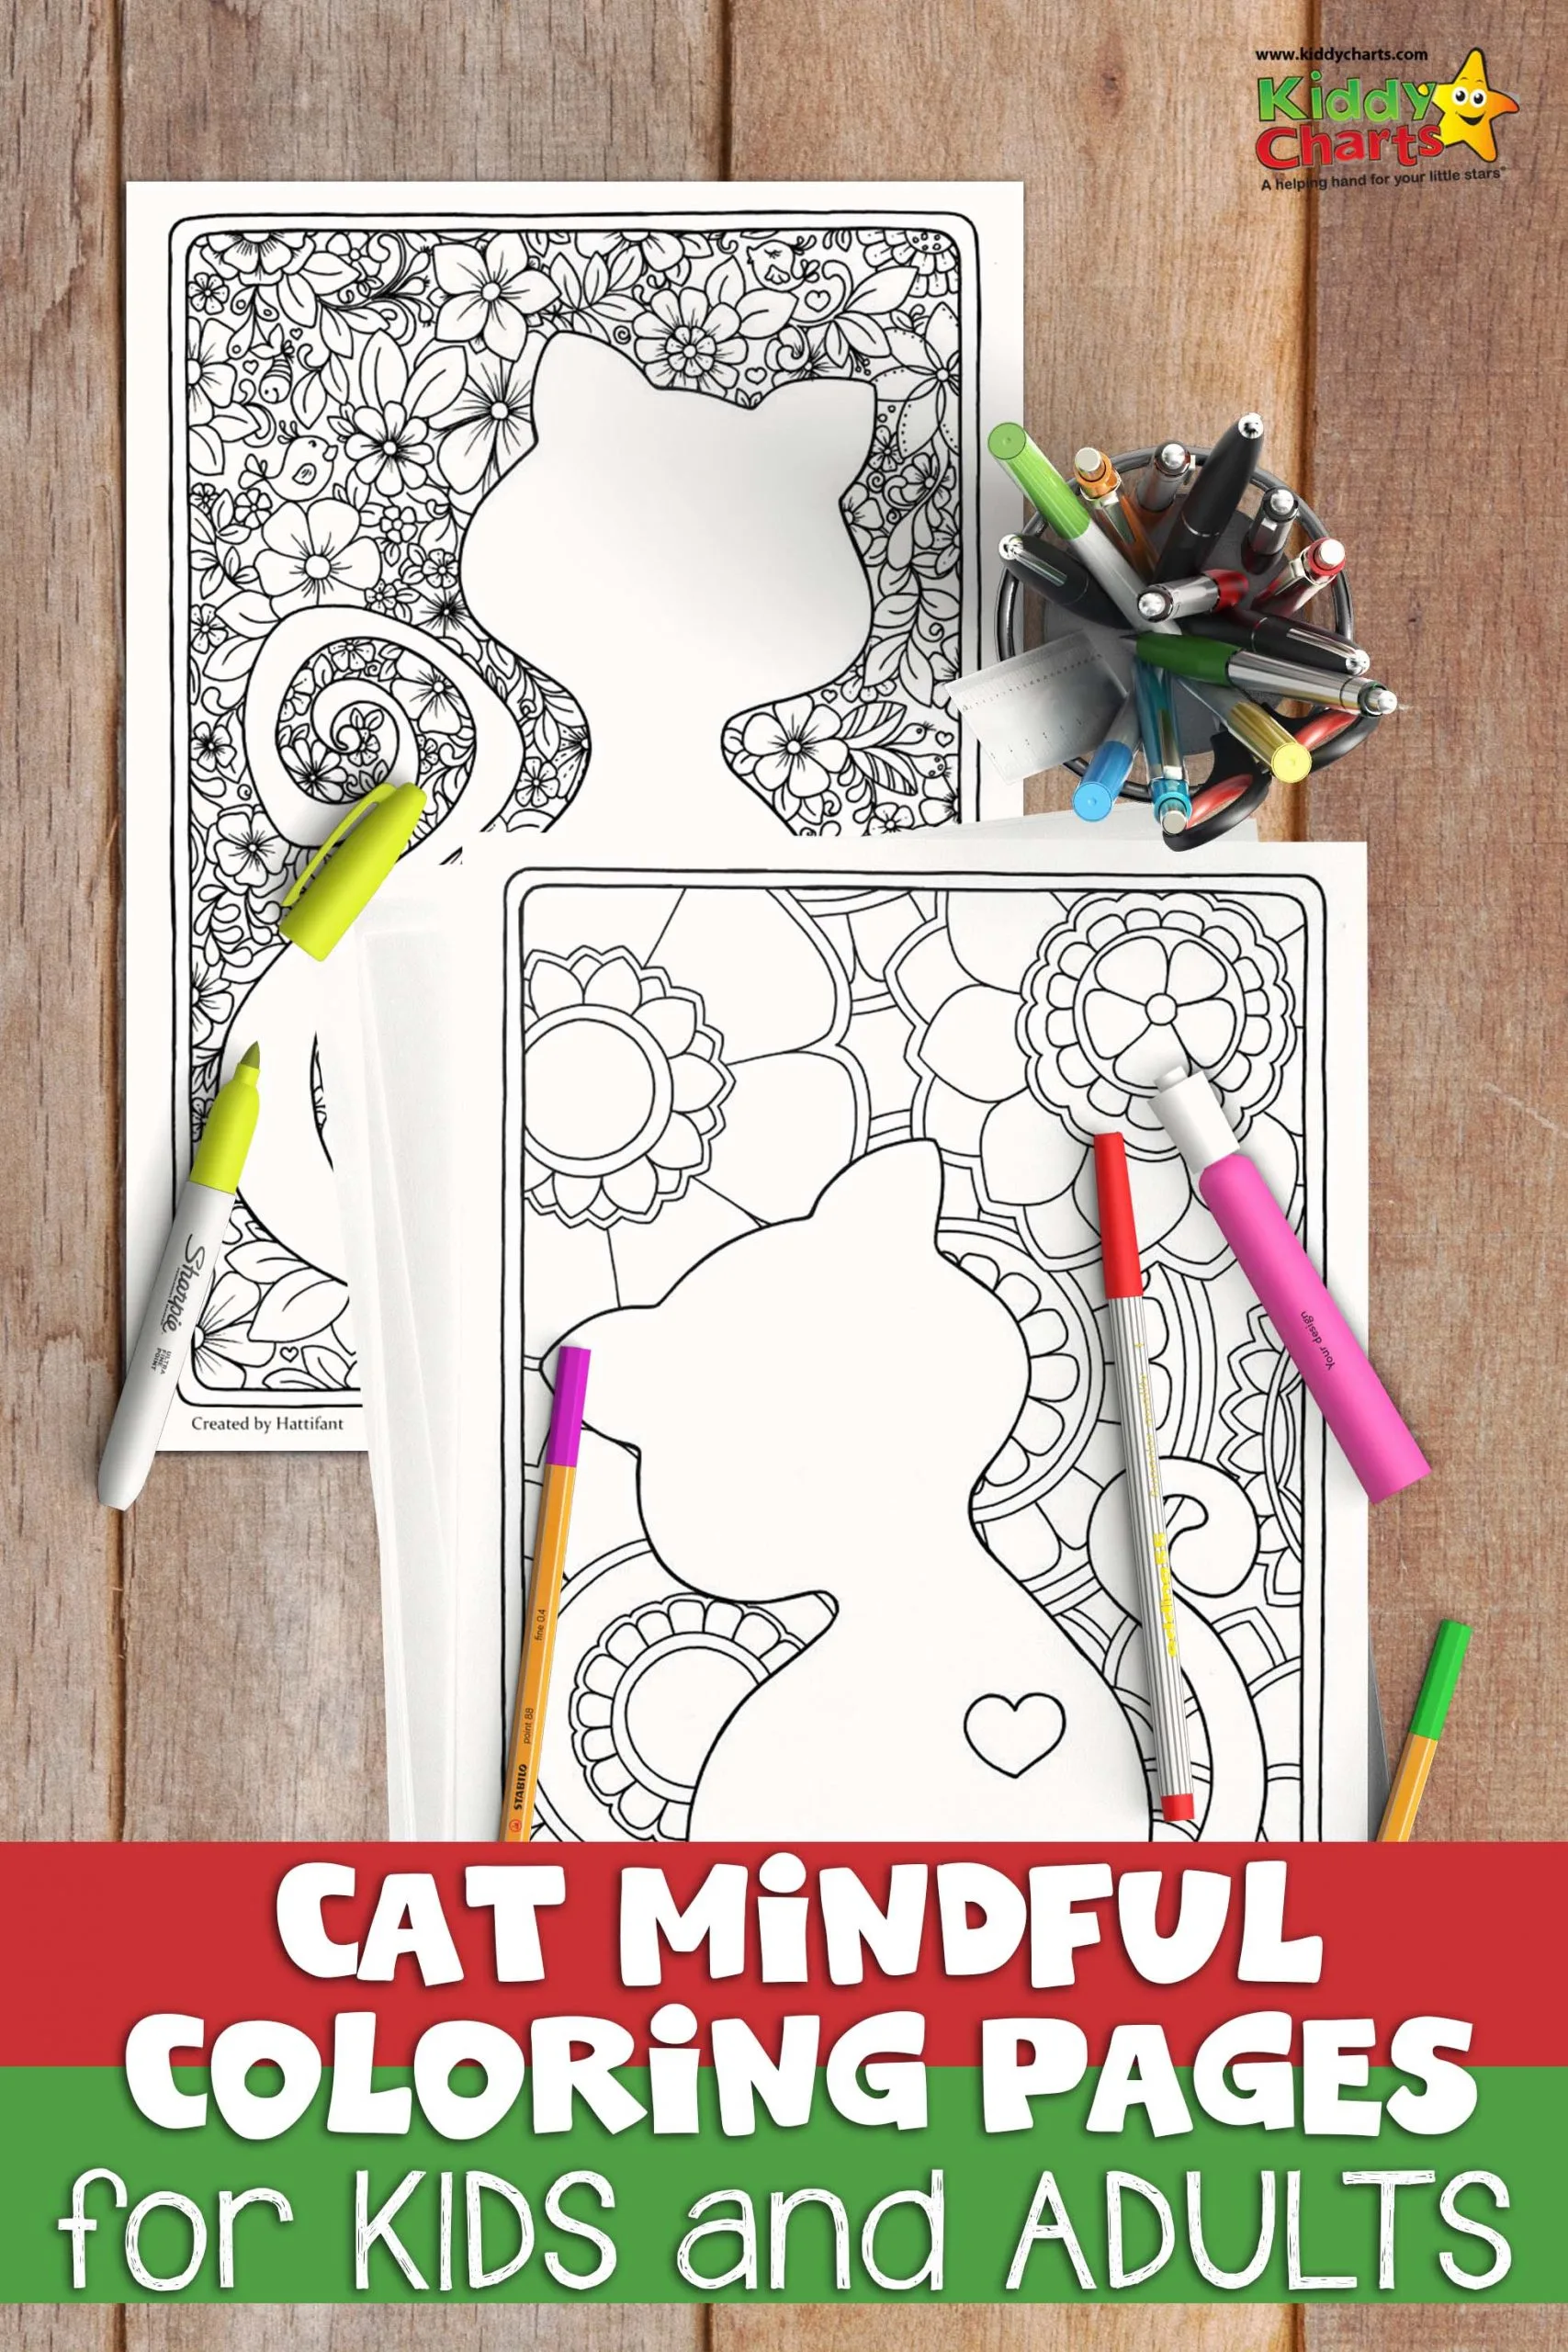 Free cat mindful coloring pages for kids adults